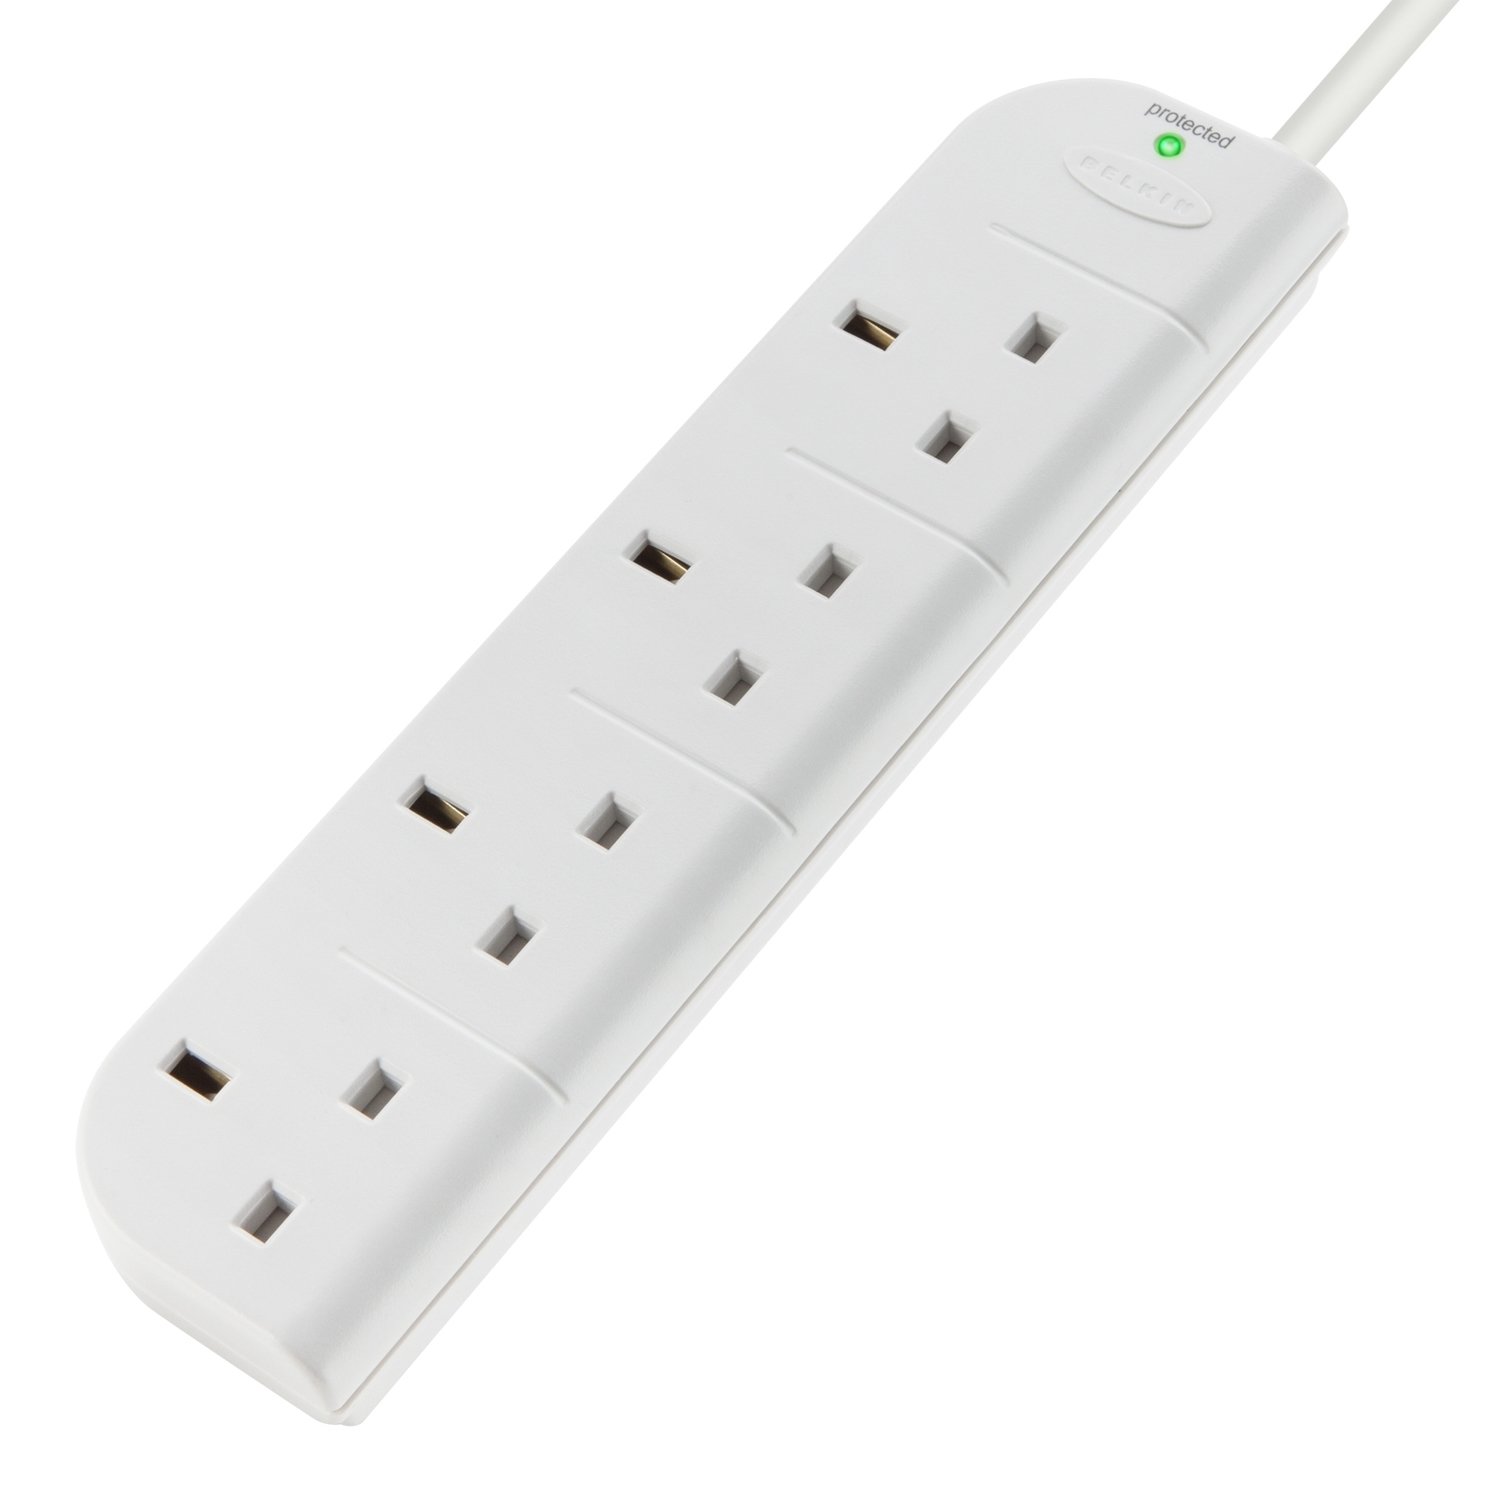 Belkin 4 Outlet Surge Protector 3M Cord F9E400SA3M